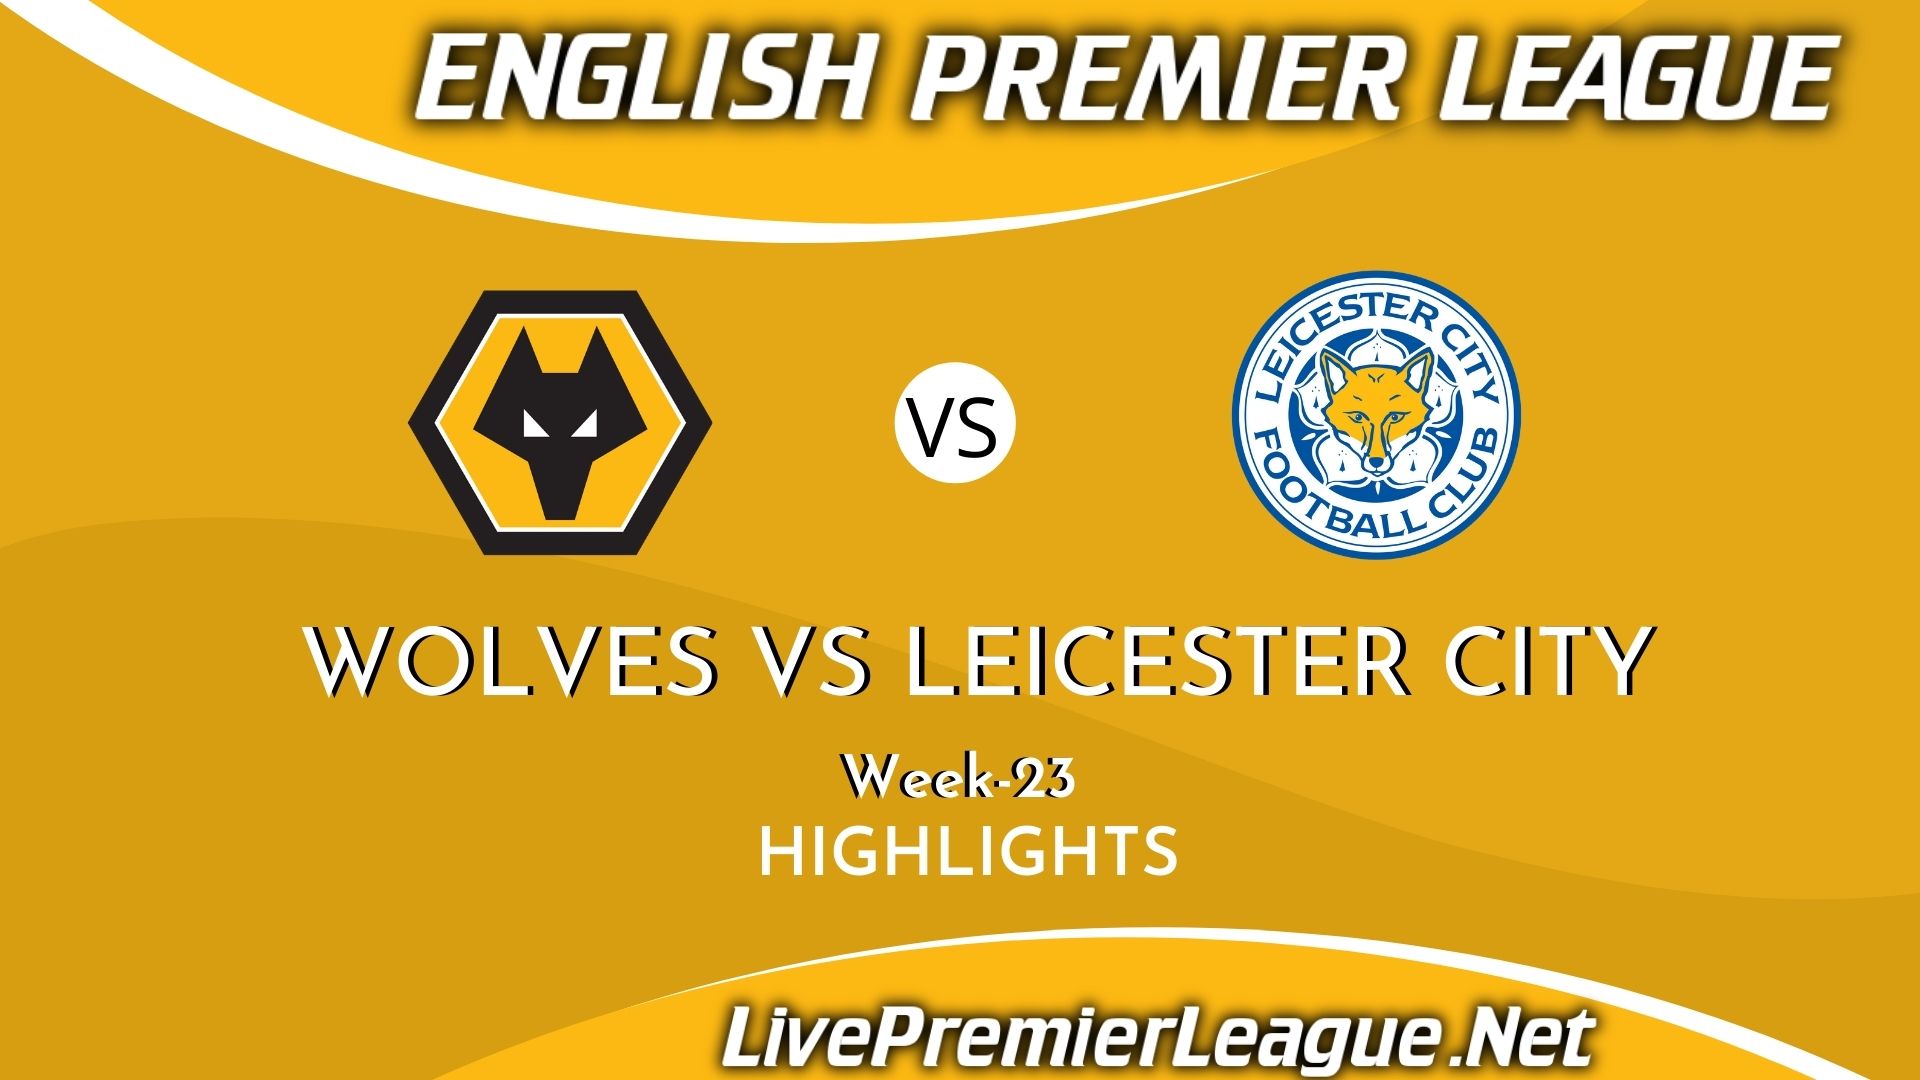 Wolves Vs Leicester City Highlights 2021 Premier League Week 23